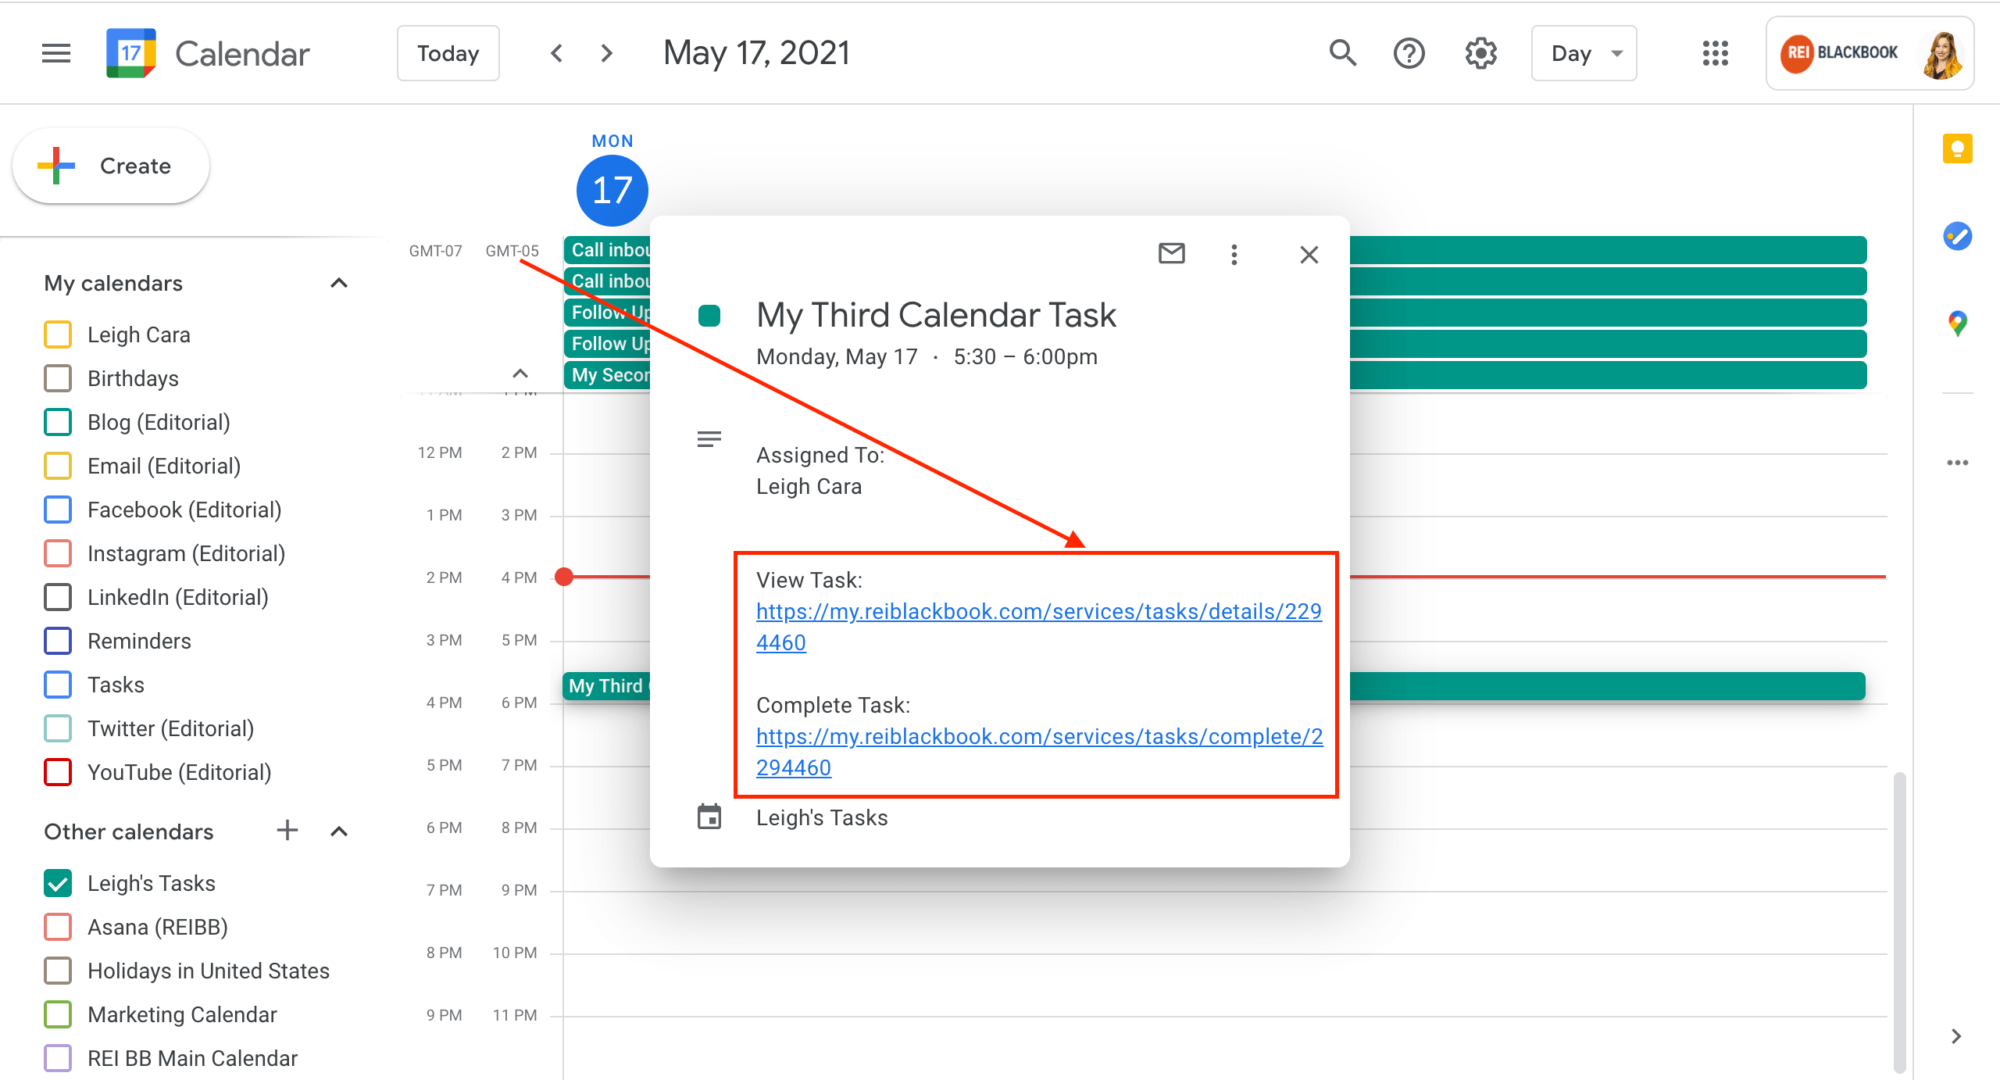 Complete and view task from inside of Google Calendar when using calendar sync.